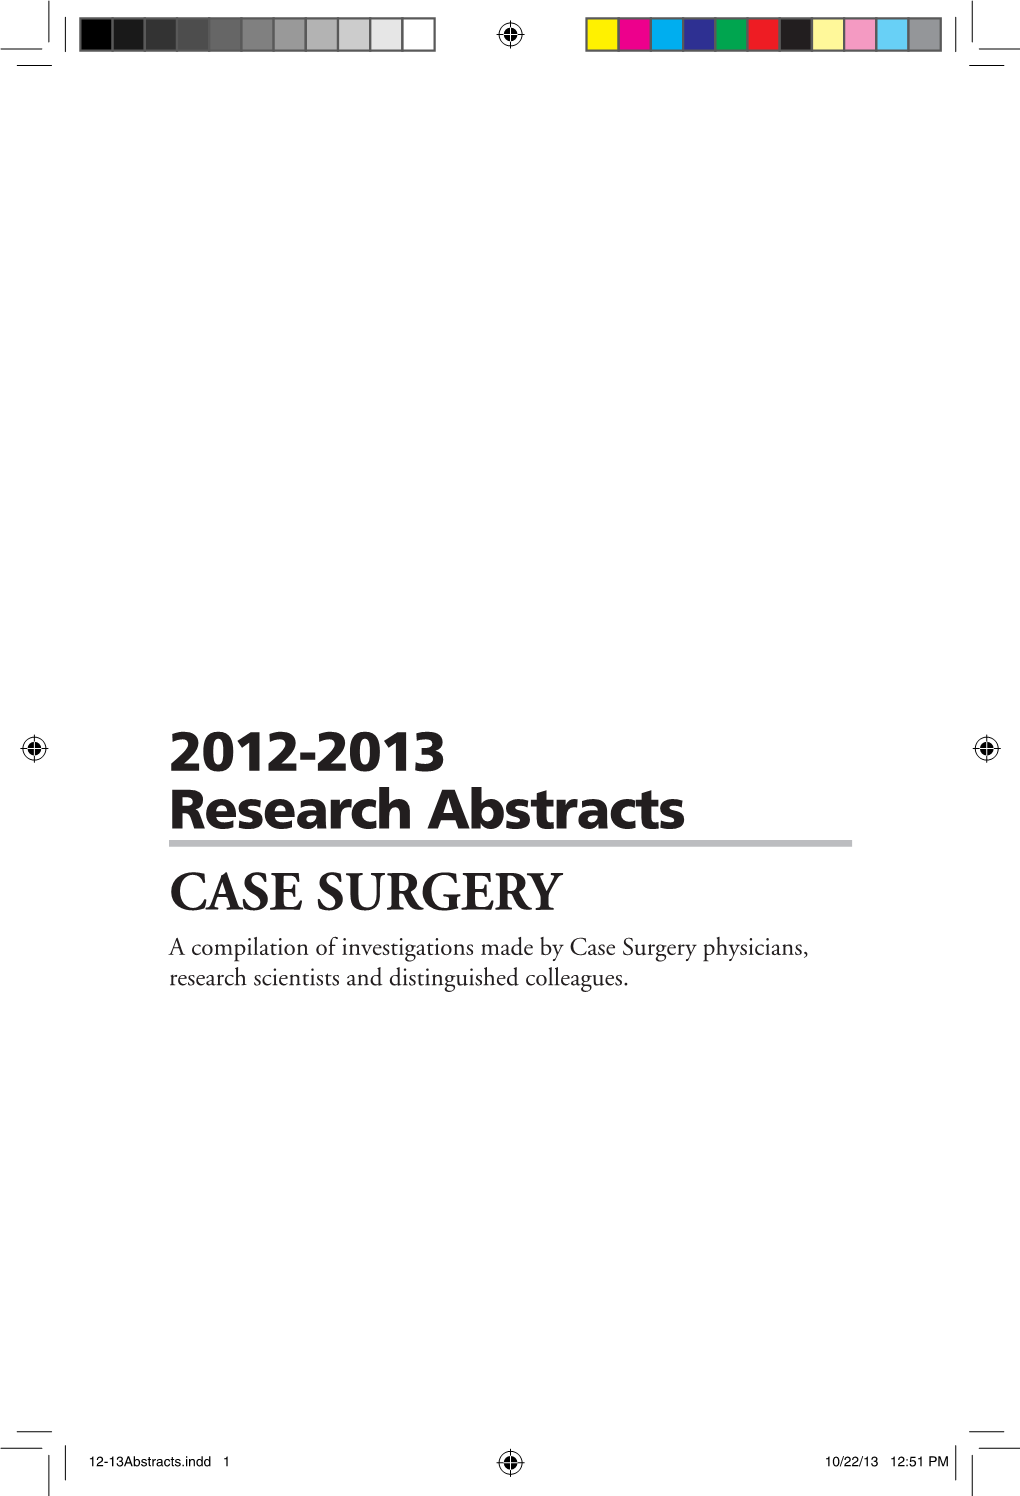 2012-2013 Research Abstracts CASE SURGERY a Compilation of Investigations Made by Case Surgery Physicians, Research Scientists and Distinguished Colleagues